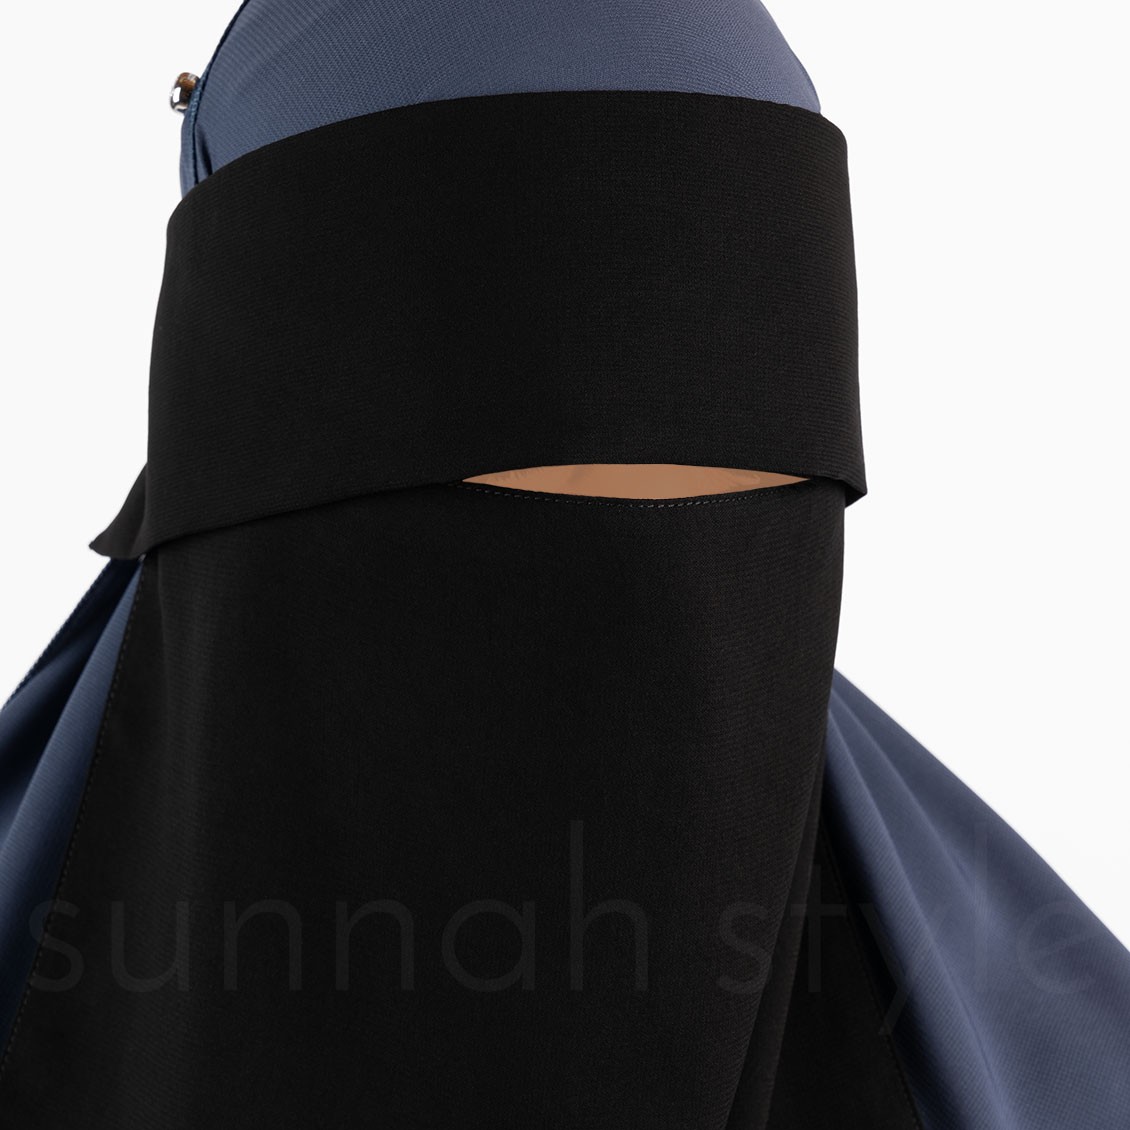 Sunnah Style One Layer Flap Makeup Niqab Black